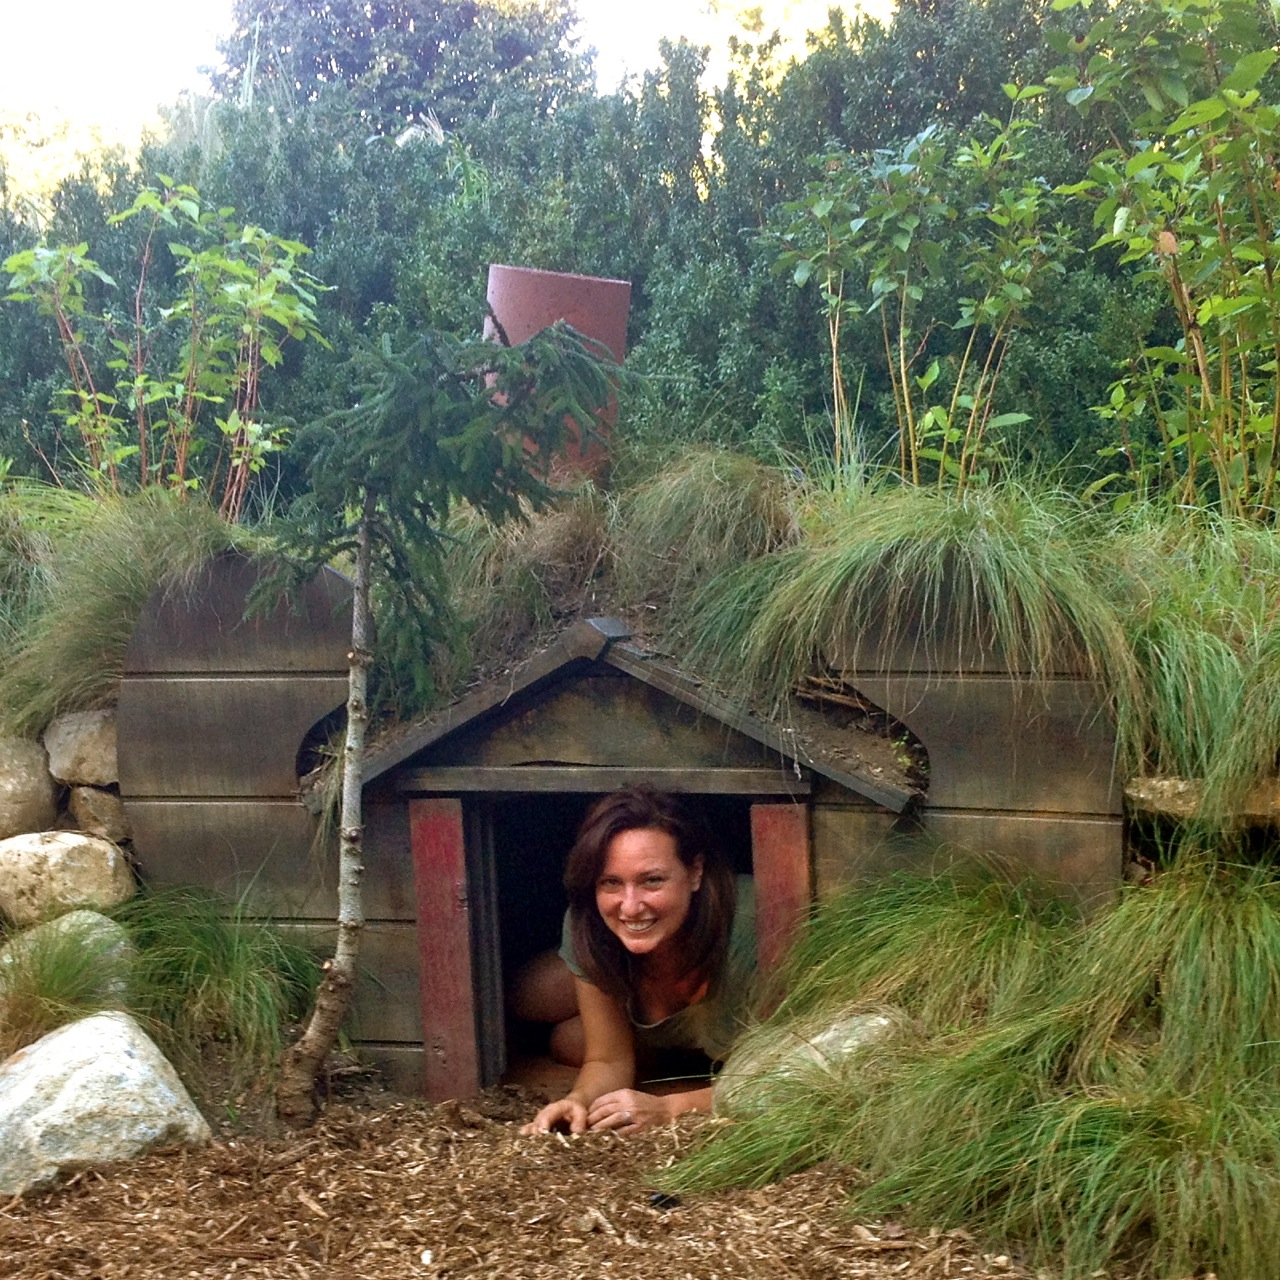 A woman with brown hair is smiling and crawling out of a small, rustic wooden structure that resembles a hobbit house, set into a grassy hillside. Surrounded by the lush greenery of a hobbit garden, she appears to be enjoying the playful, fairy-tale setting.